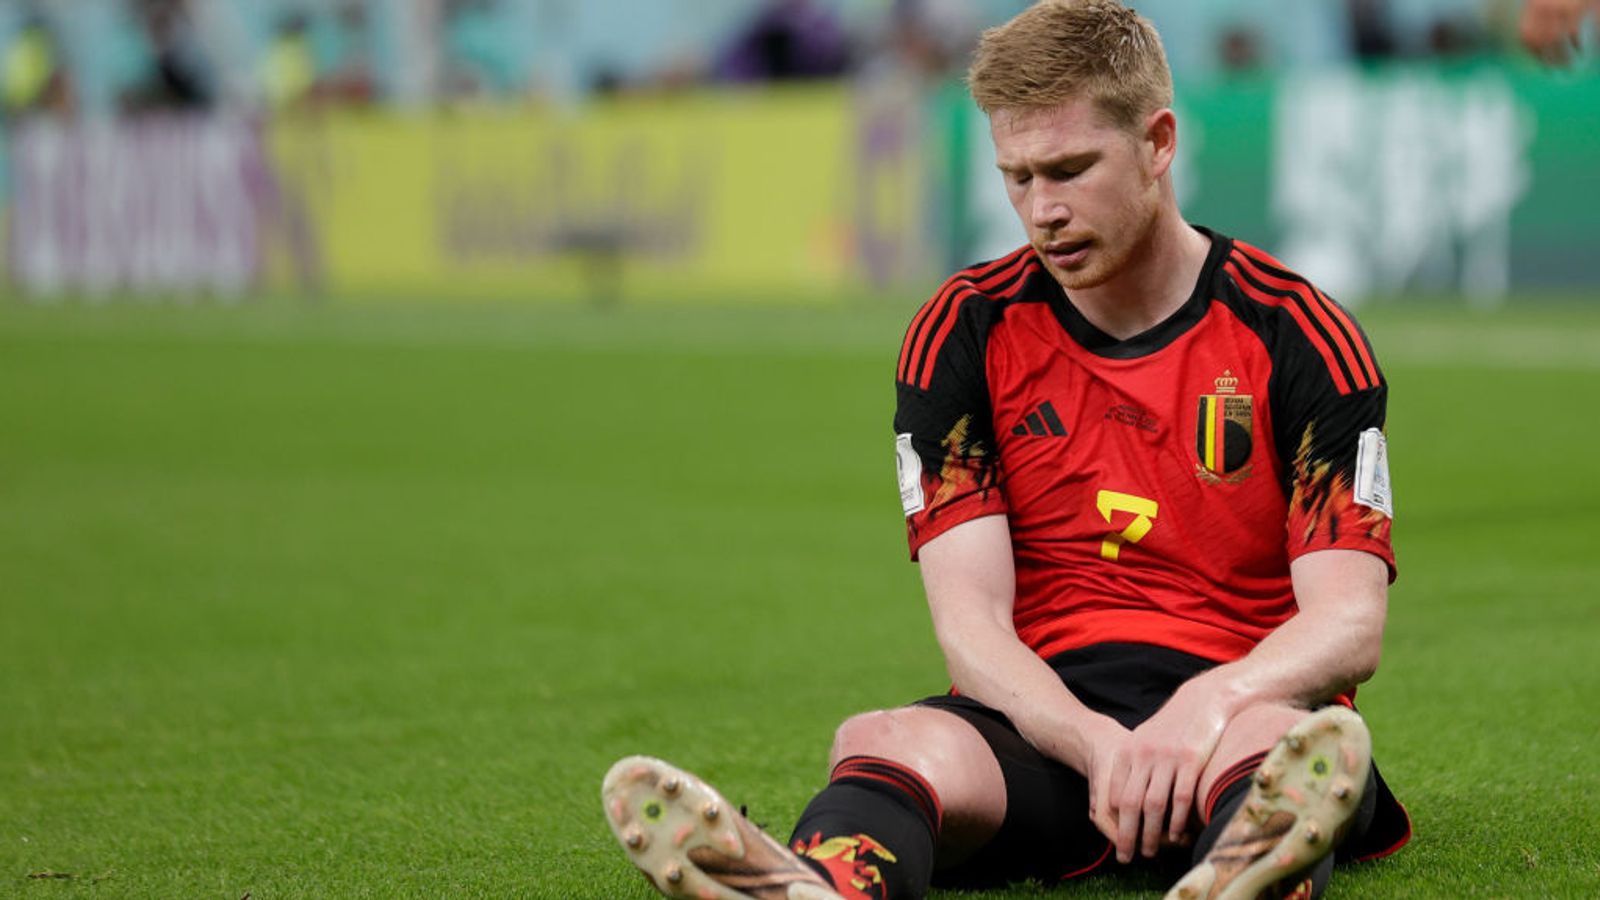 100+] Kevin De Bruyne Pictures | Wallpapers.com